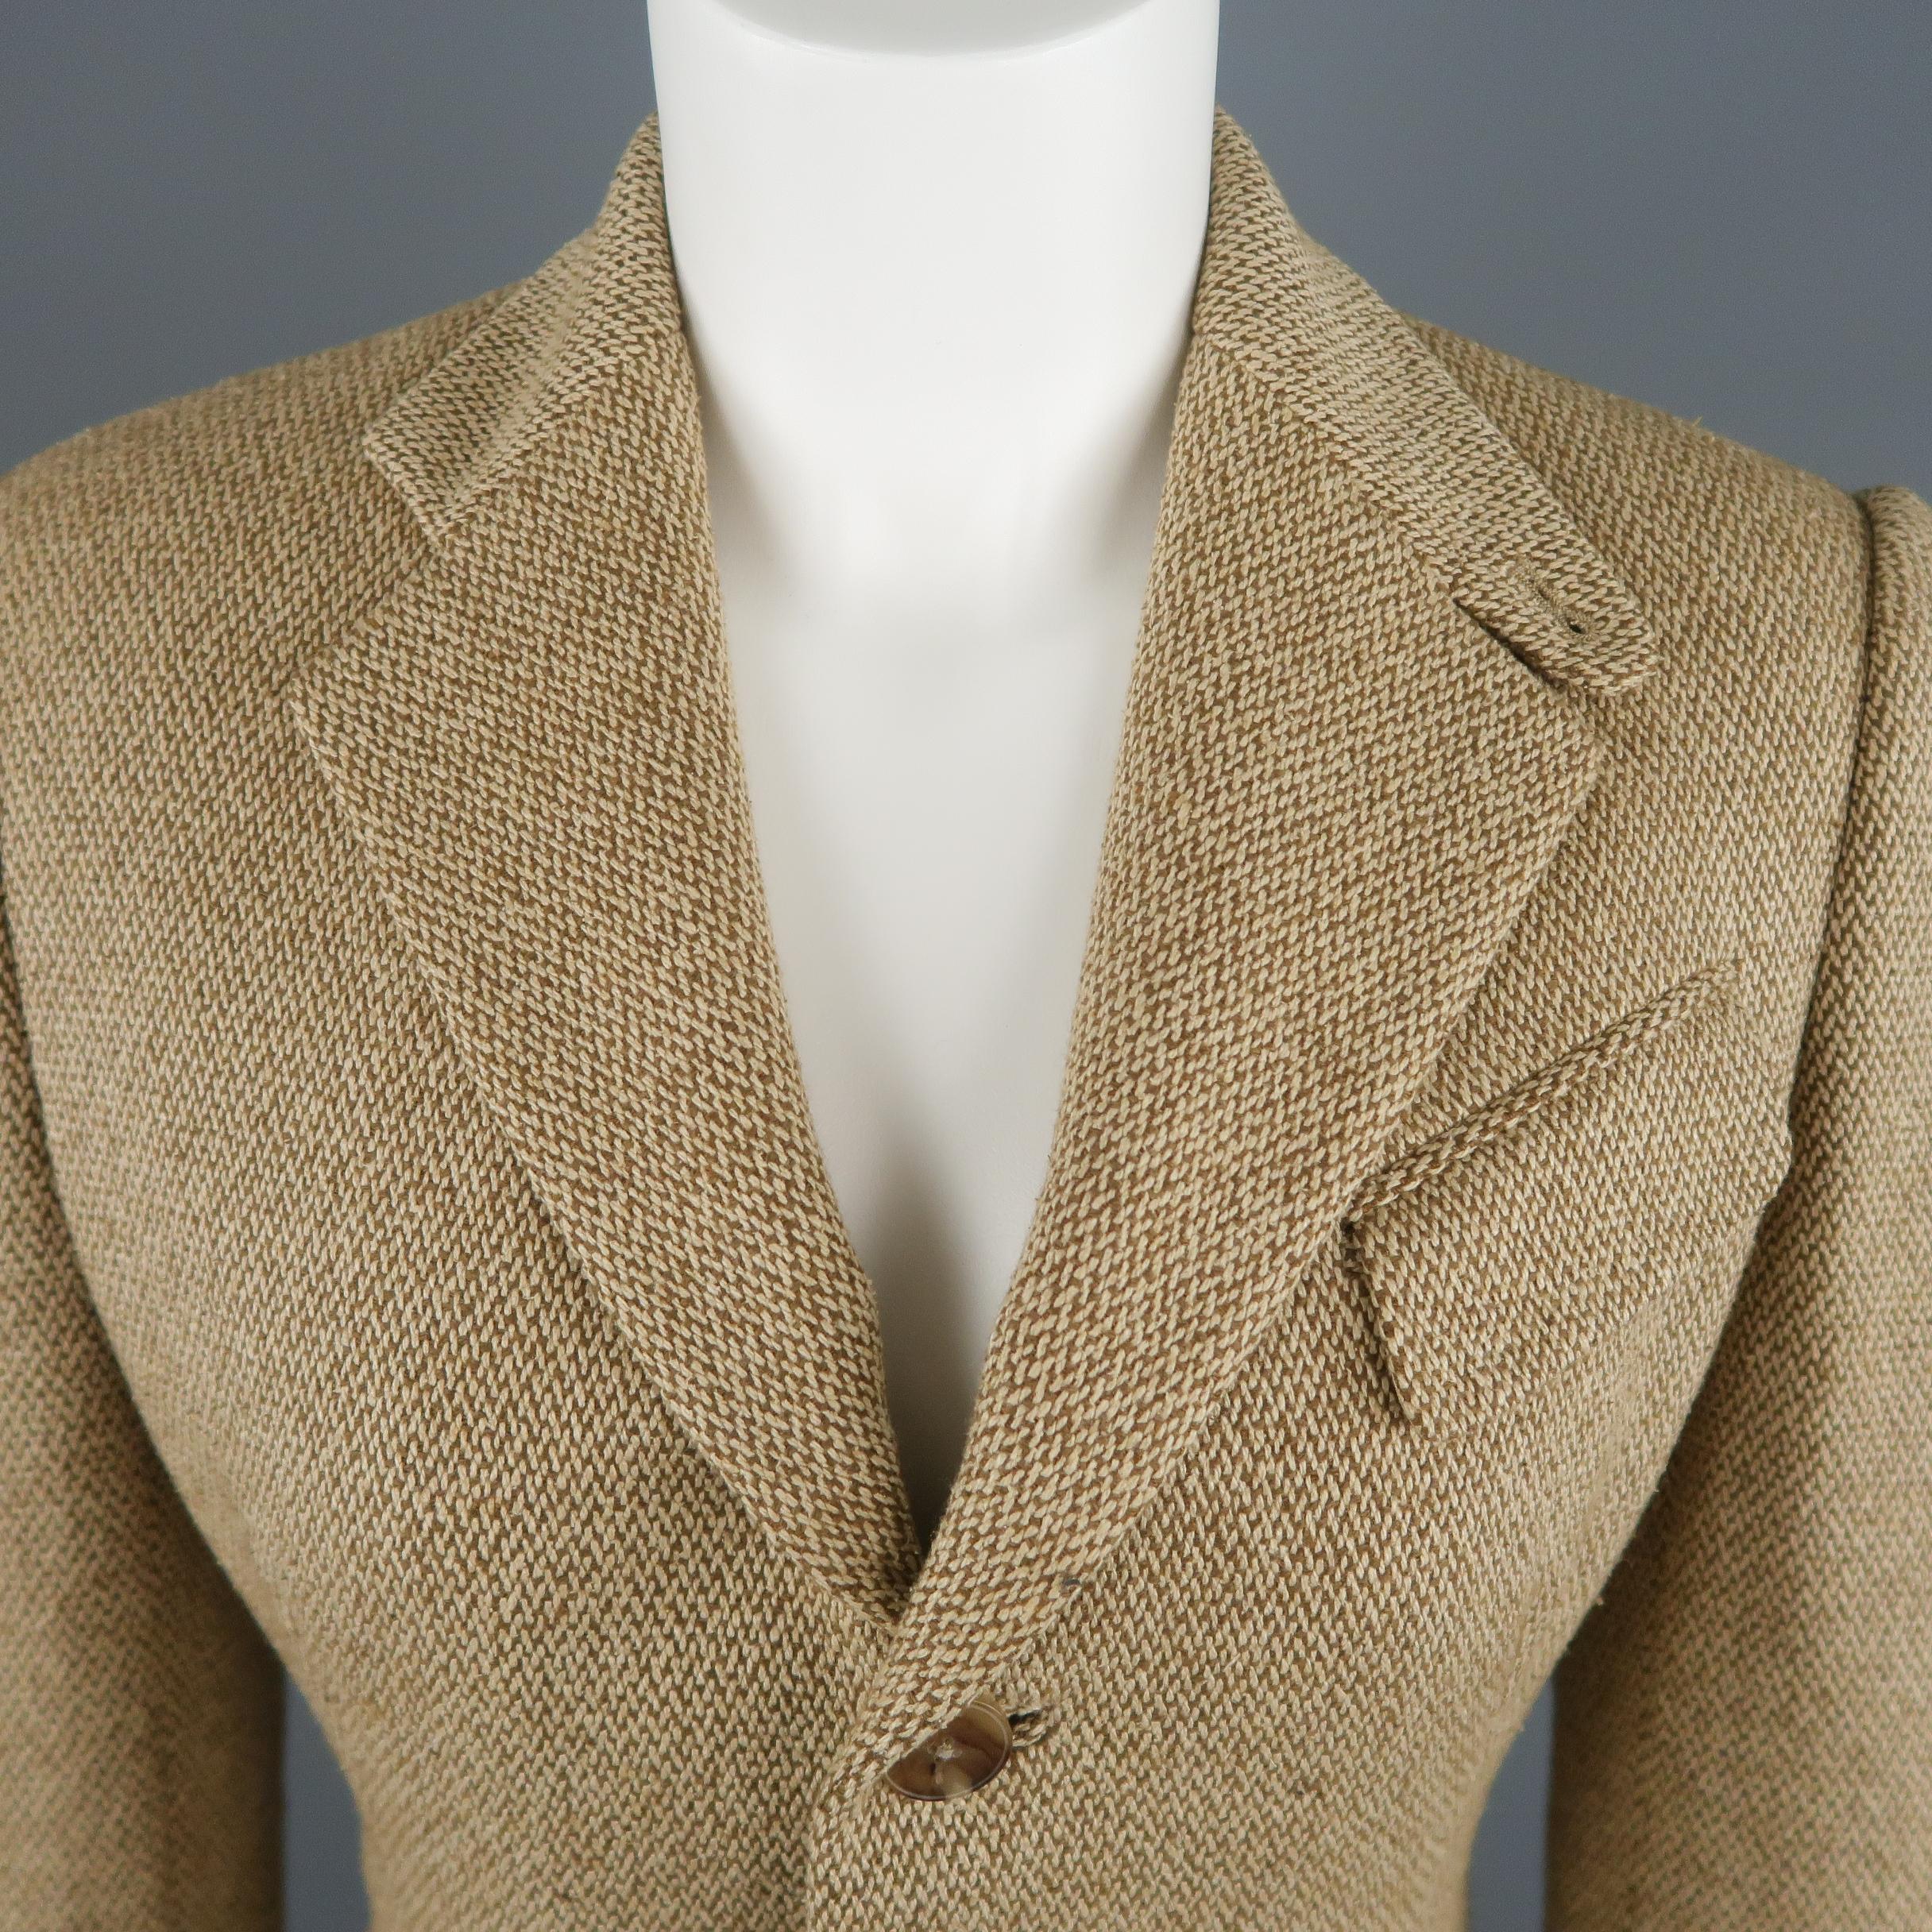 Black Label by RALPH LAUREN equestrian style jacket comes in brown and beige silk wool blend textured tweed with a single breasted three button front, notch lapel with tab collar, slanted pockets, and silk liner. Made in USA.
 
Very Good Pre-Owned